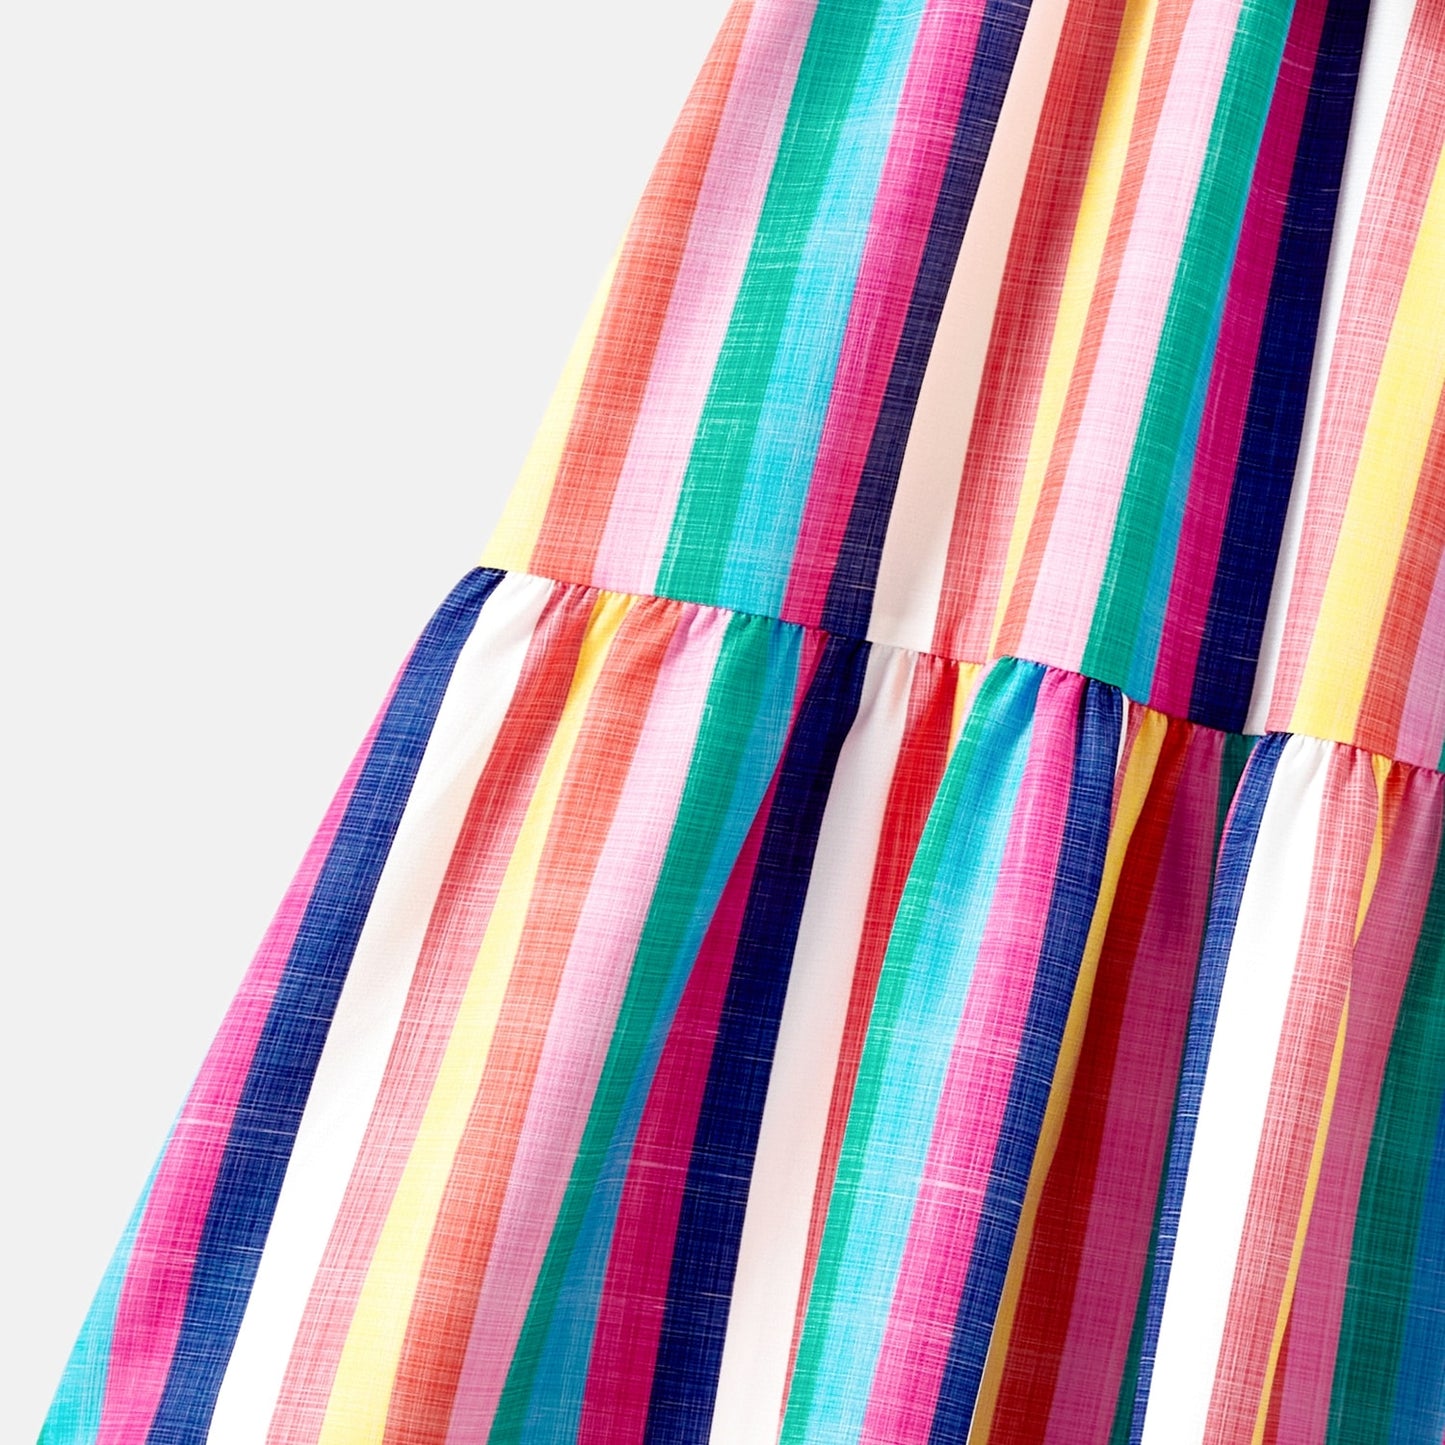 Mommy and Me Dresses Sleeveless Colorful Striped Belted Dresses - ChildAngle